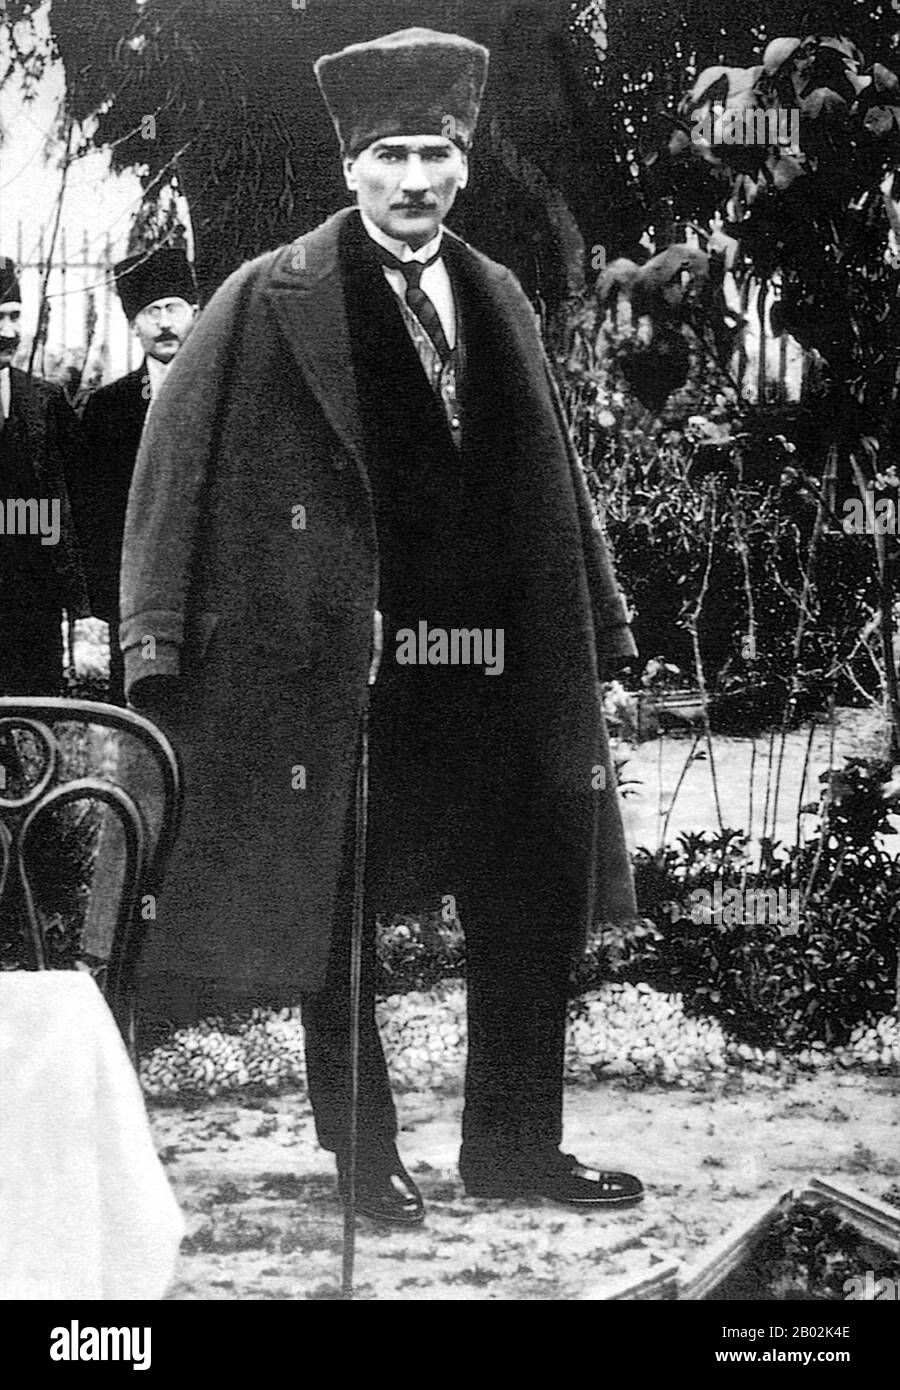 Mustafa Kemal Atatürk (1881–10 November 1938) was an Ottoman and Turkish army officer, revolutionary statesman, writer, and the first President of Turkey.  He is credited with being the founder of the modern Turkish state. Atatürk was a military officer during World War I. Following the defeat of the Ottoman Empire in World War I, he led the Turkish national movement in the Turkish War of Independence.  Having established a provisional government in Ankara, he defeated the forces sent by the Allies. His military campaigns gained Turkey independence. Atatürk then embarked upon a program of poli Stock Photo